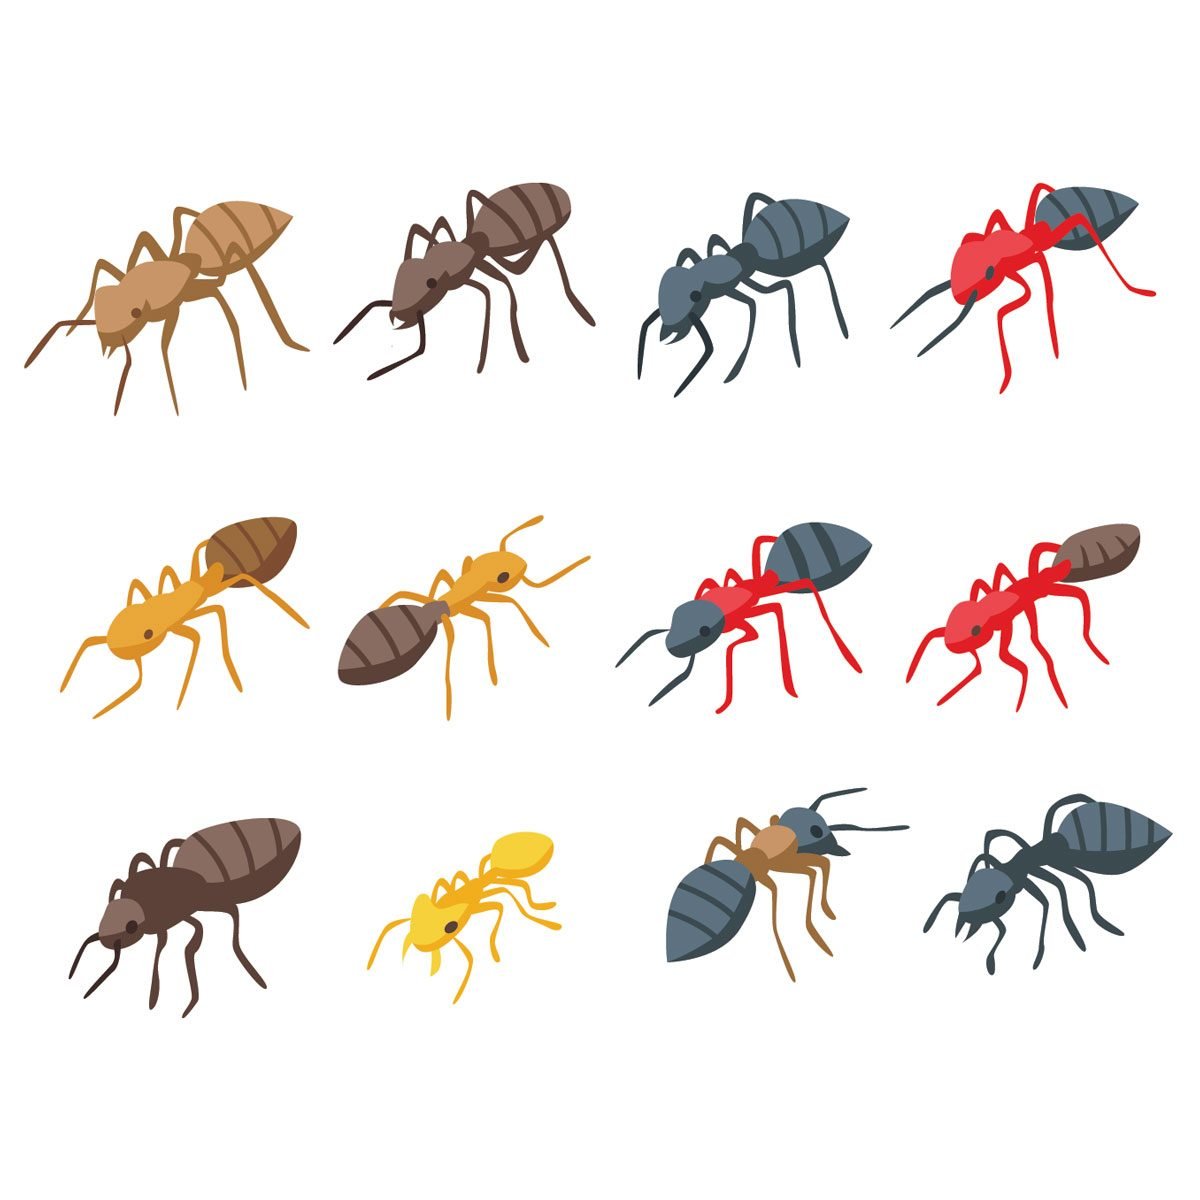 Seven Tips for Quickly Eliminating Large Ant Infestations - Pest Control  Technology